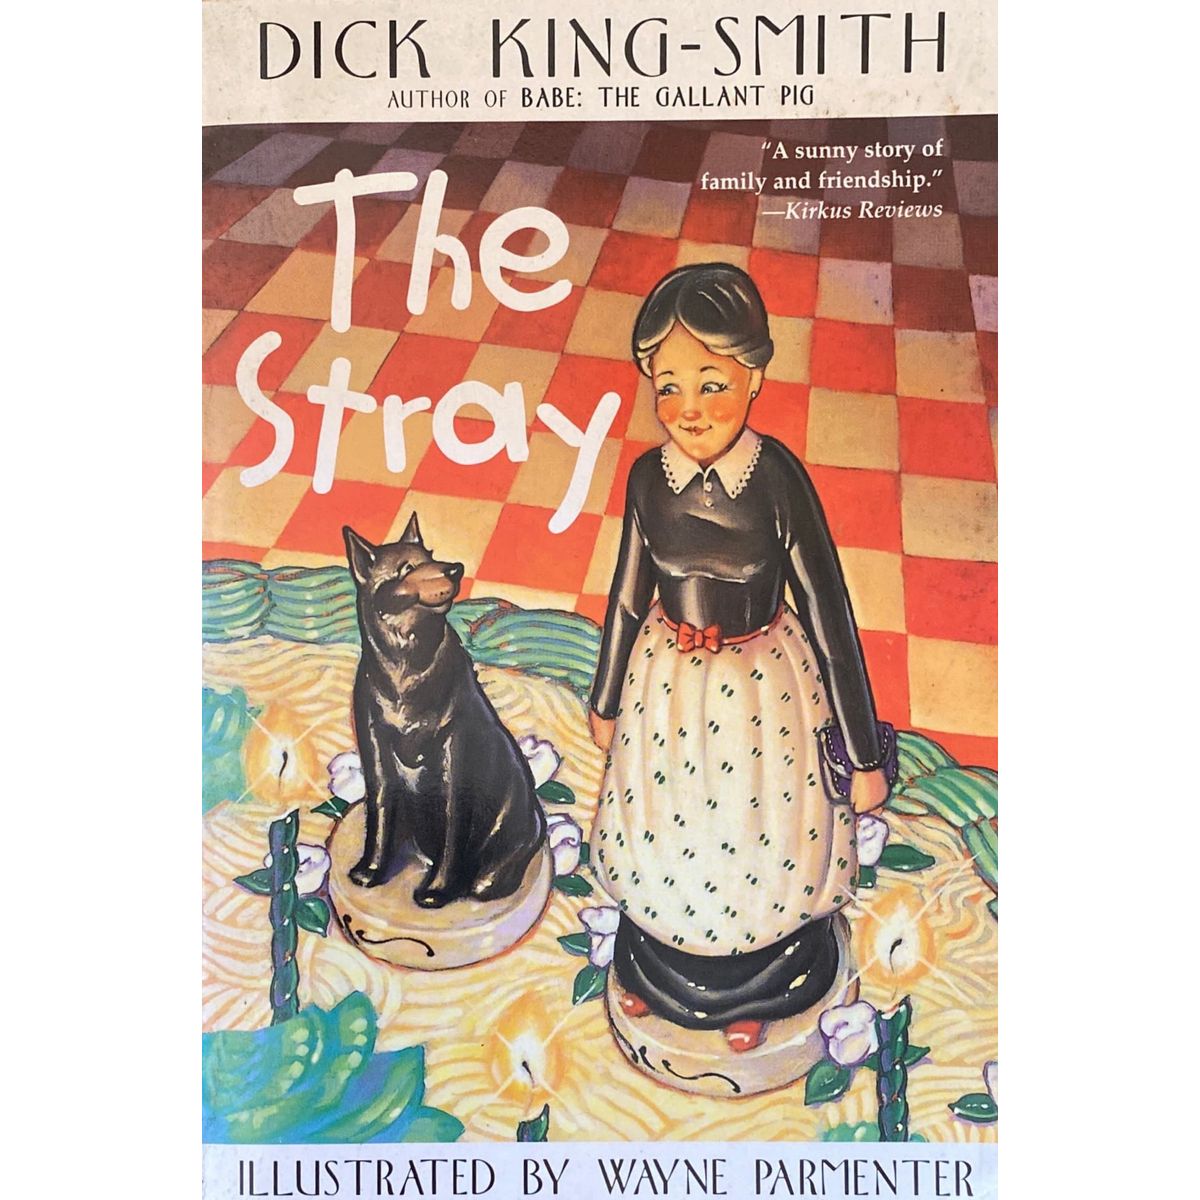 ISBN: 9780439046763 / 0439046769 - The Stray by Dick King-Smith, illustrated by Wayne Parmenter [1996]